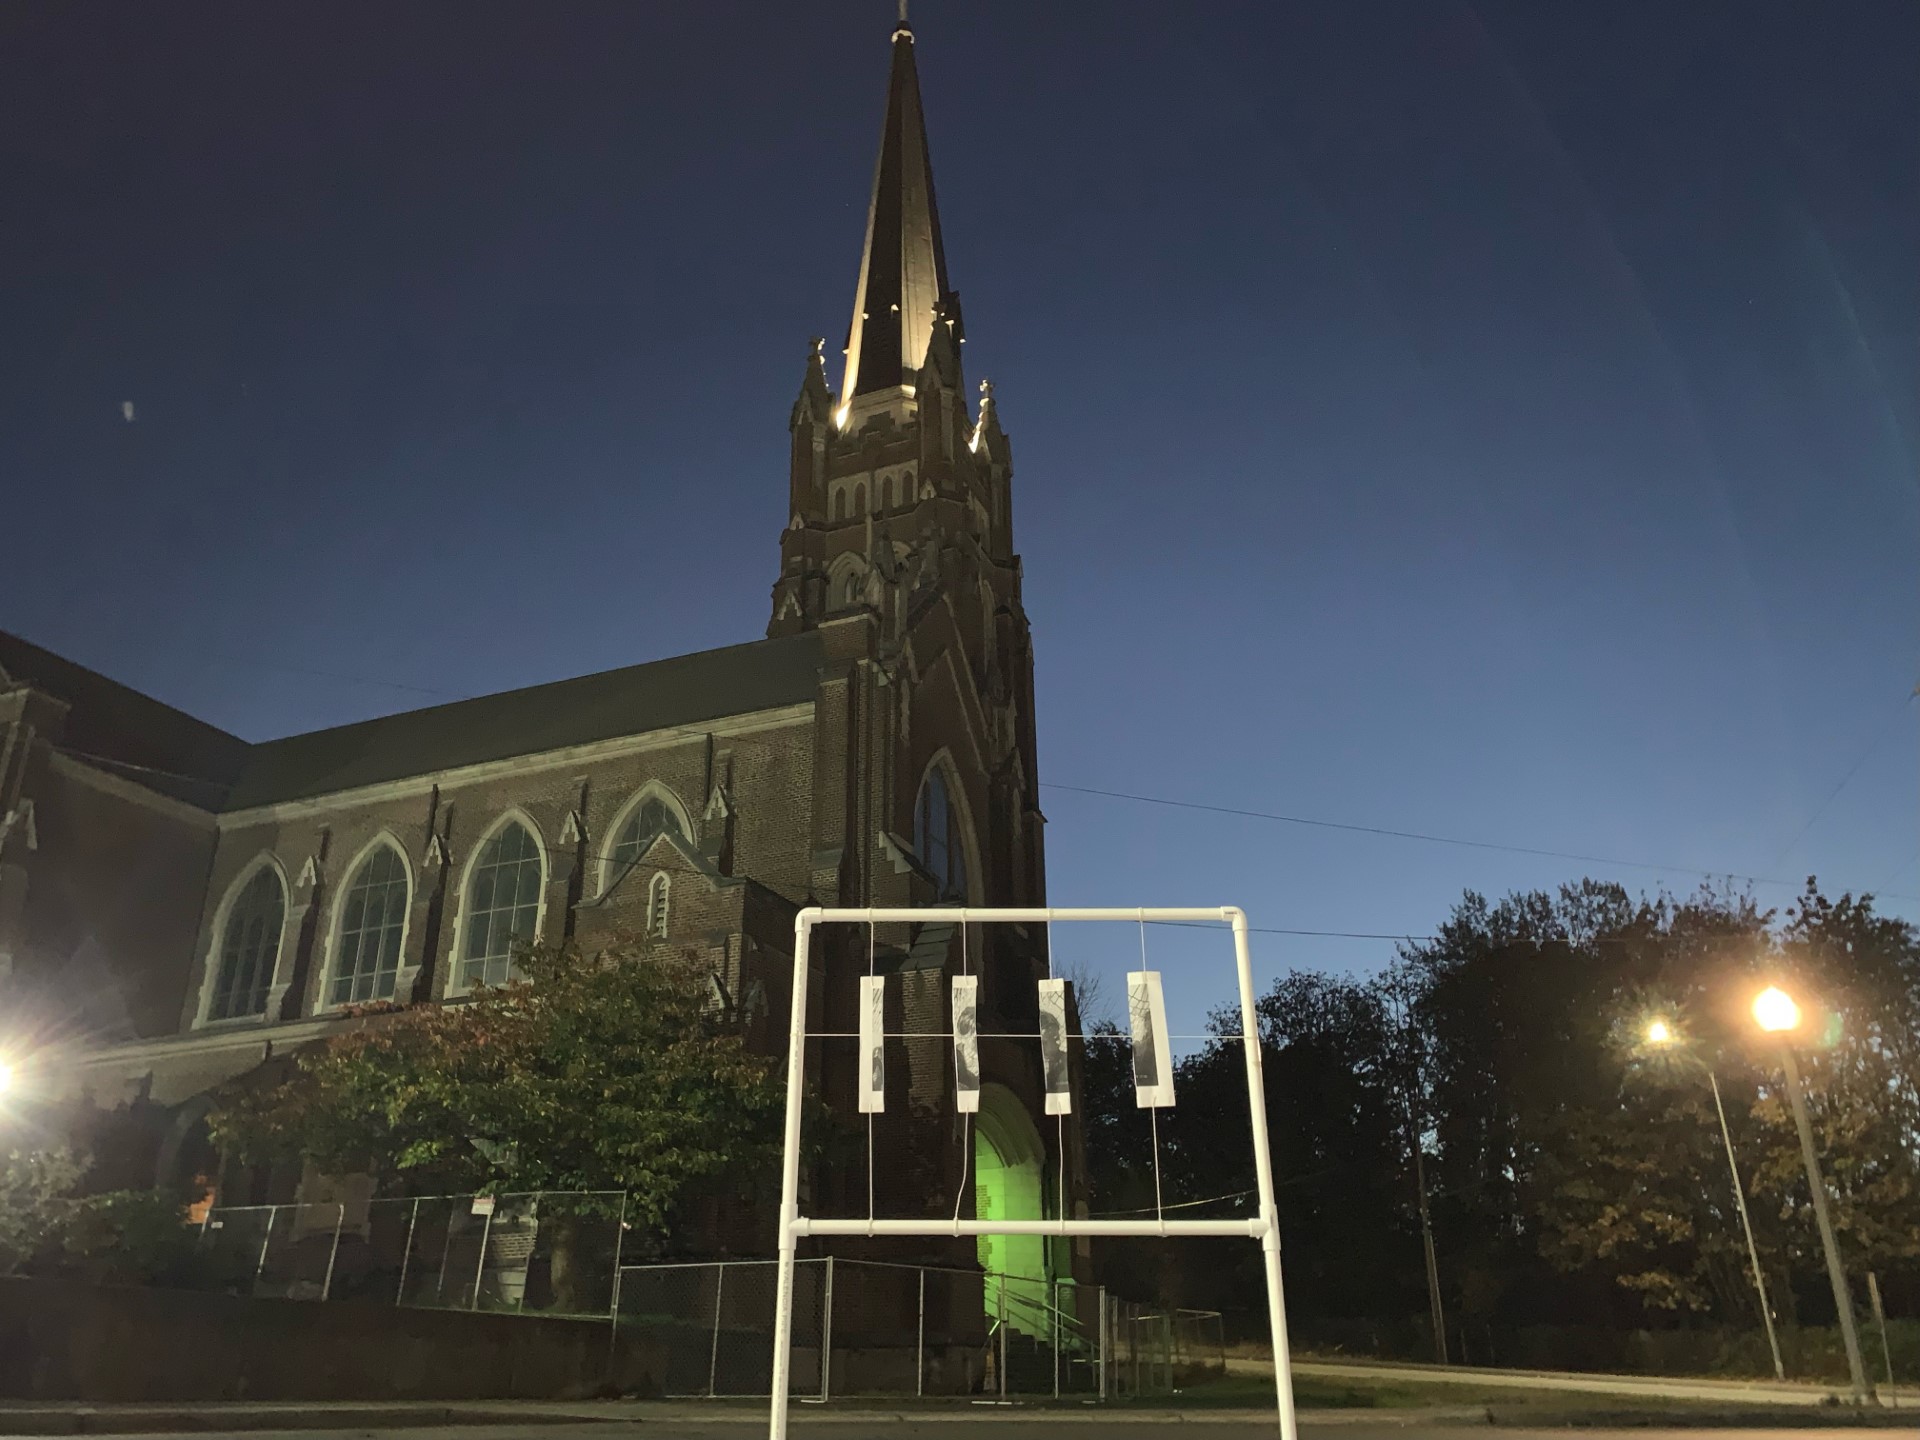 PICTURED: The exterior of an old church at twilight. A contemporary public art installation is in the foreground.